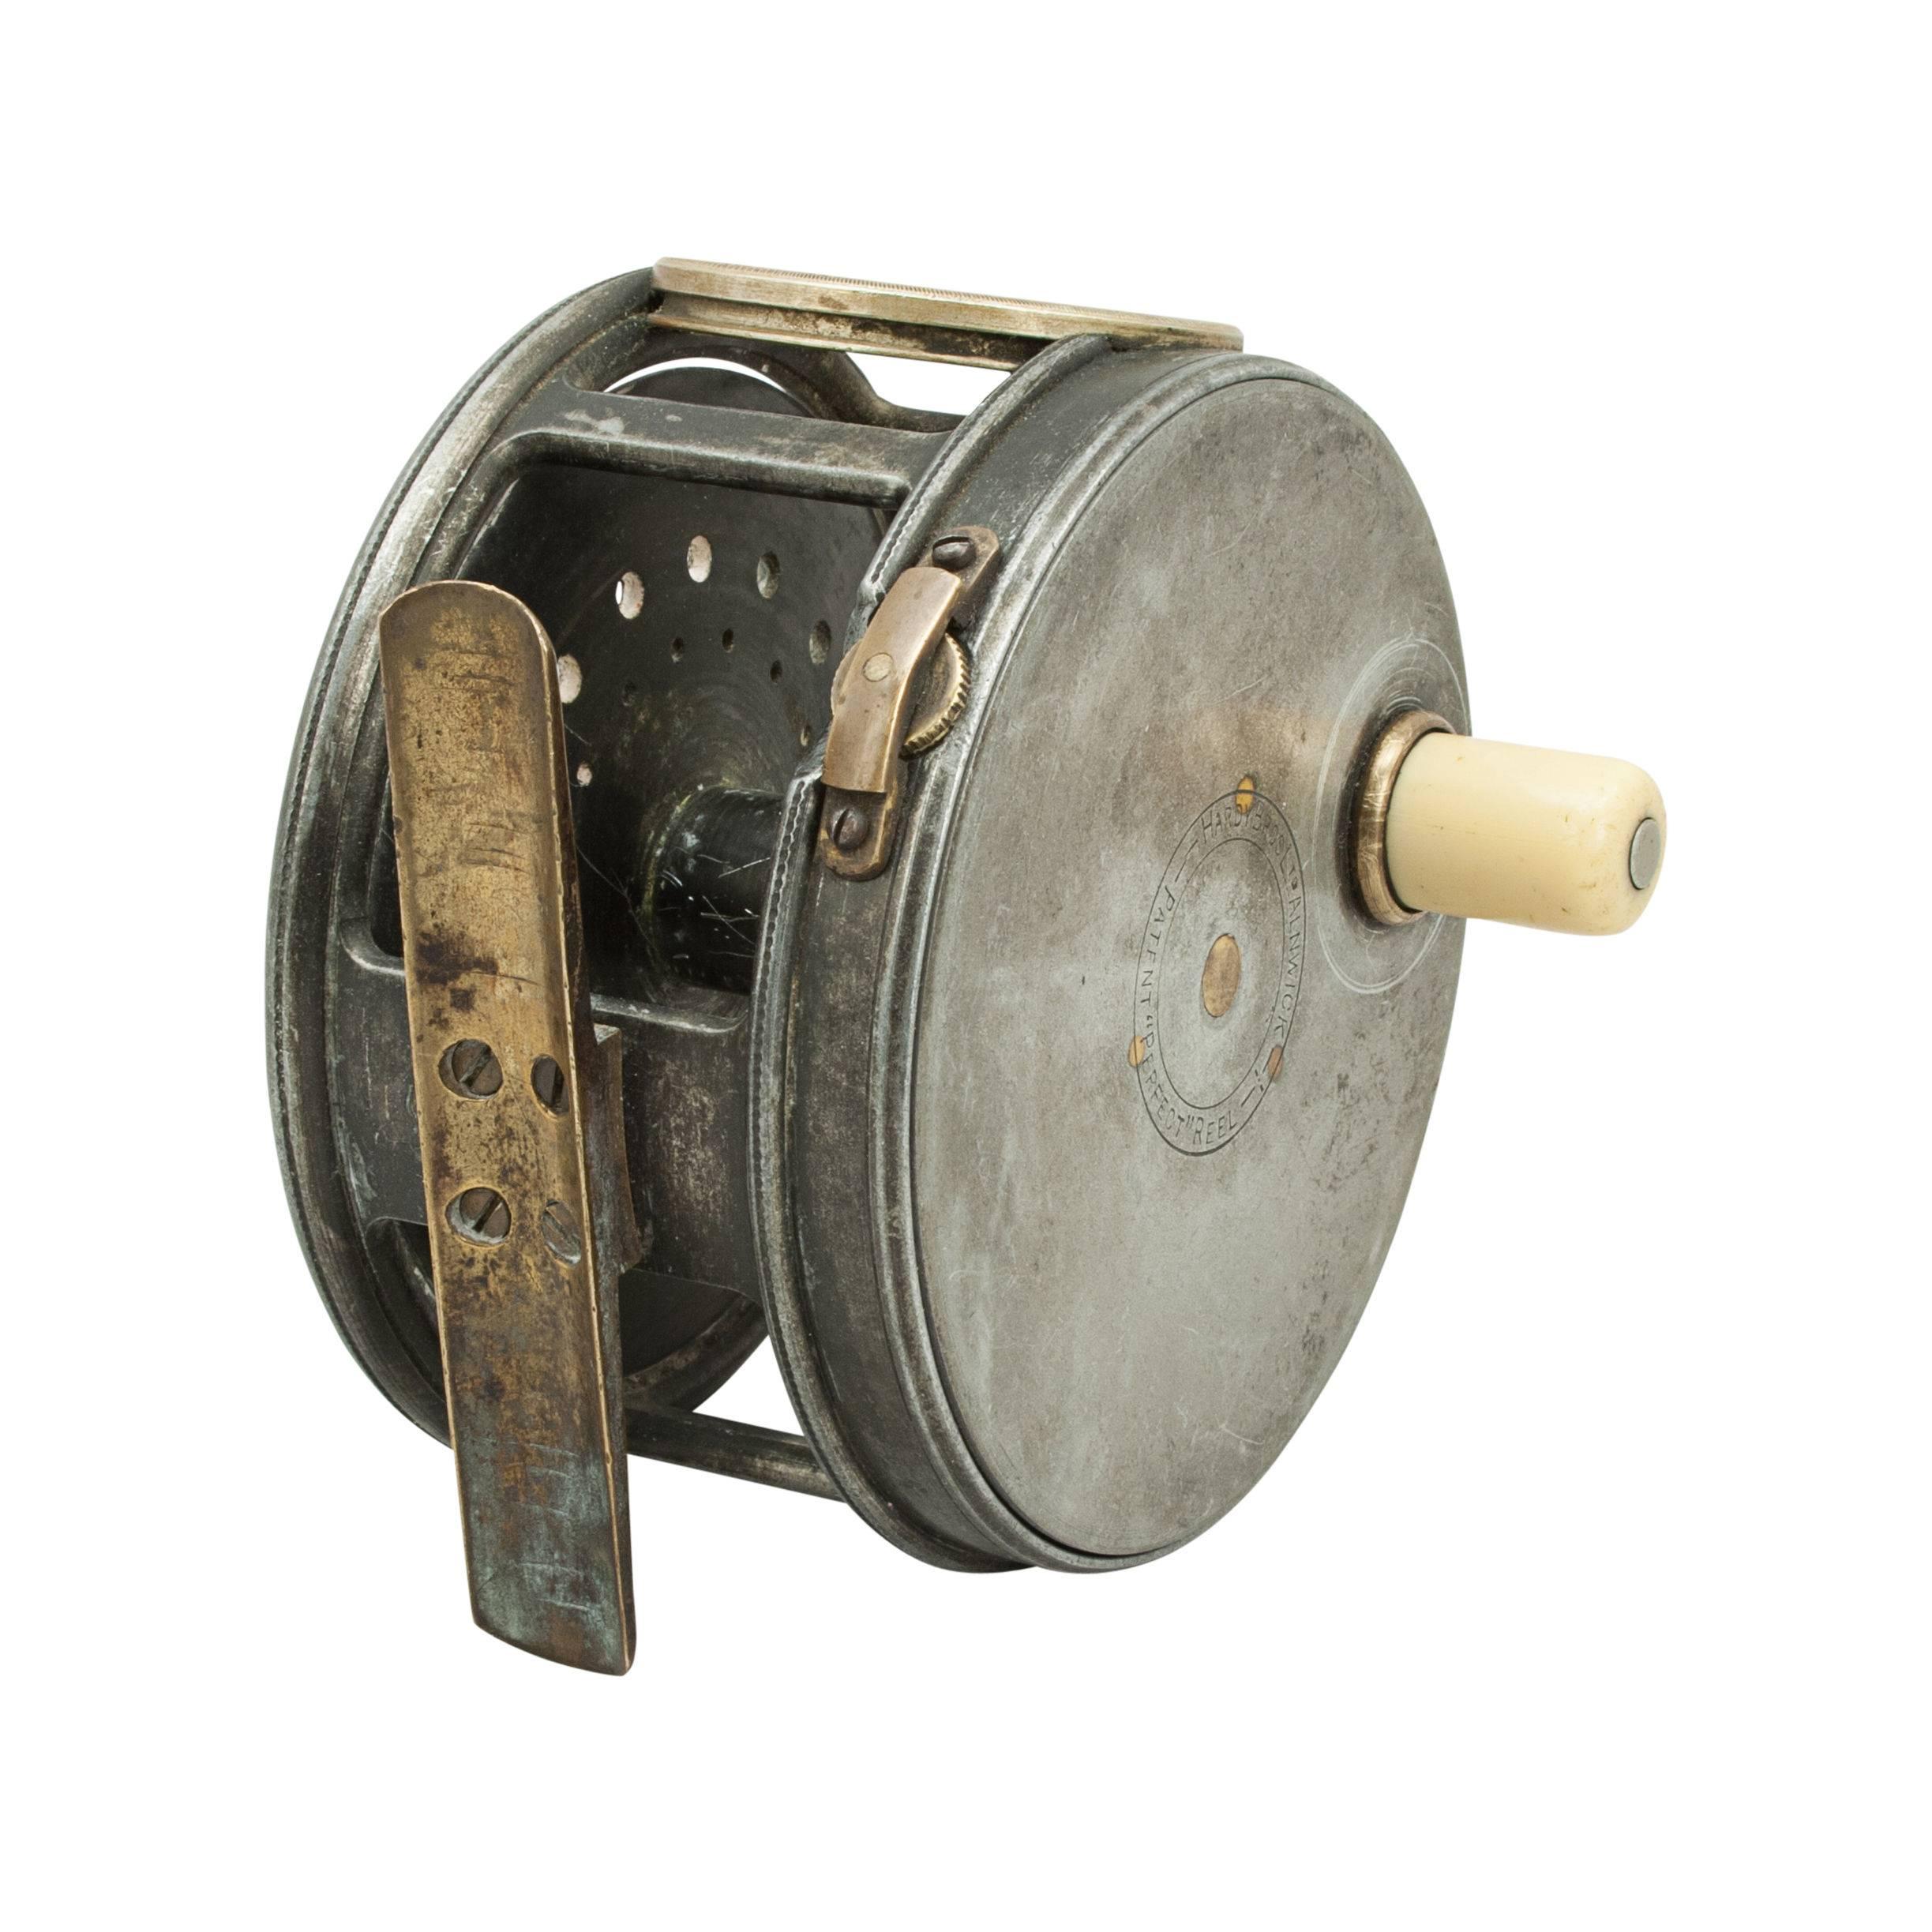 Hardy Perfect Salmon Fishing Reel, 1912 

This Hardy Perfect salmon reel is with smooth brass foot, rim tension screw and agate line guard. 
A good Hardy Perfect Salmon reel with ivory handle, smooth brass foot, rim tension screw, brass line